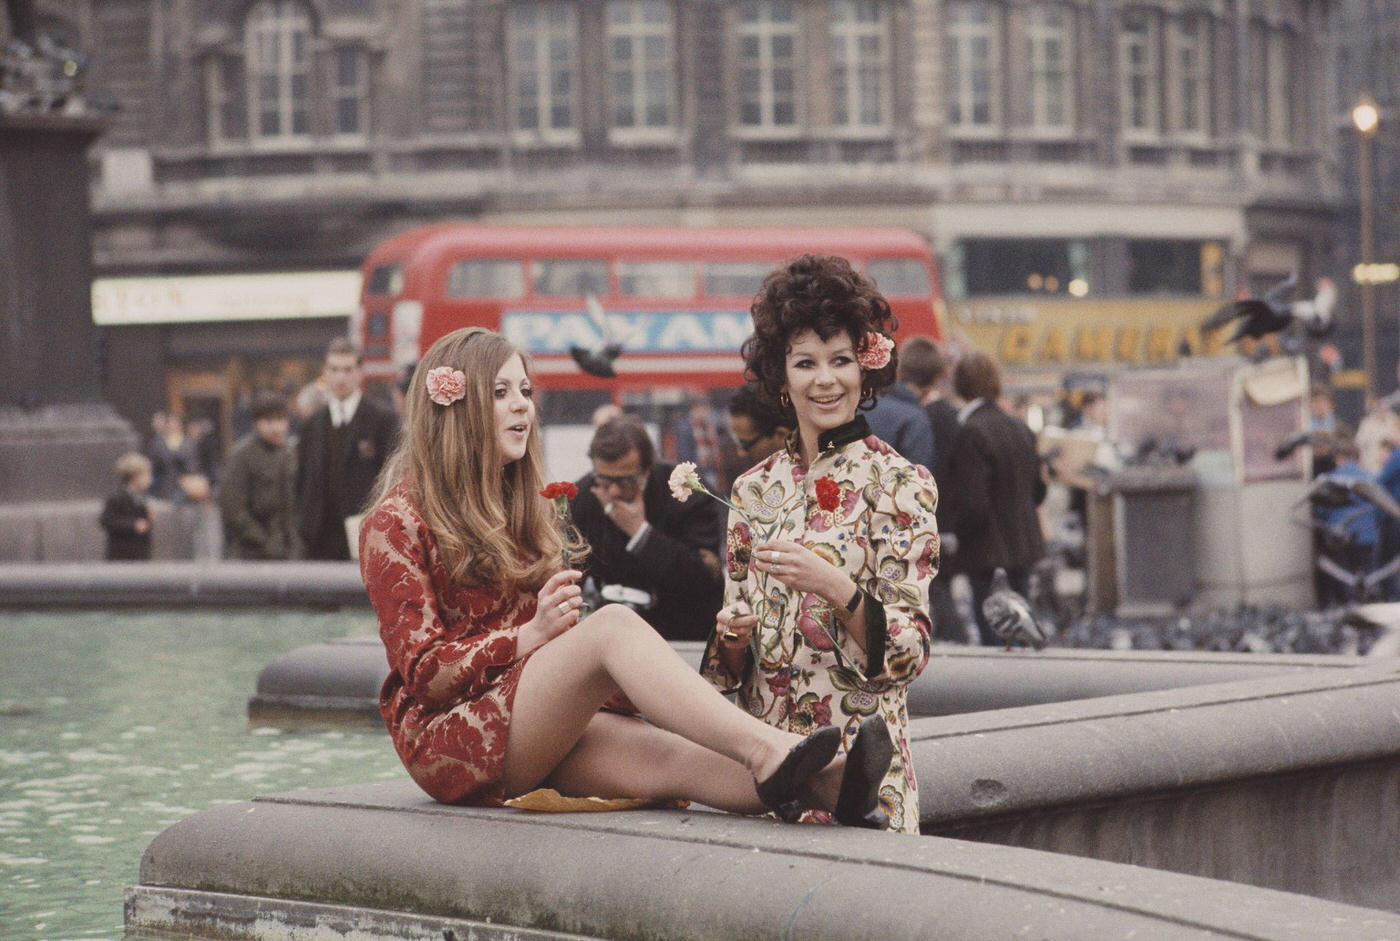 Two young girls dressed in floral print hippie style tunics stand holding flowers beside ornamental fountains in Trafalgar Square, London in November 1967